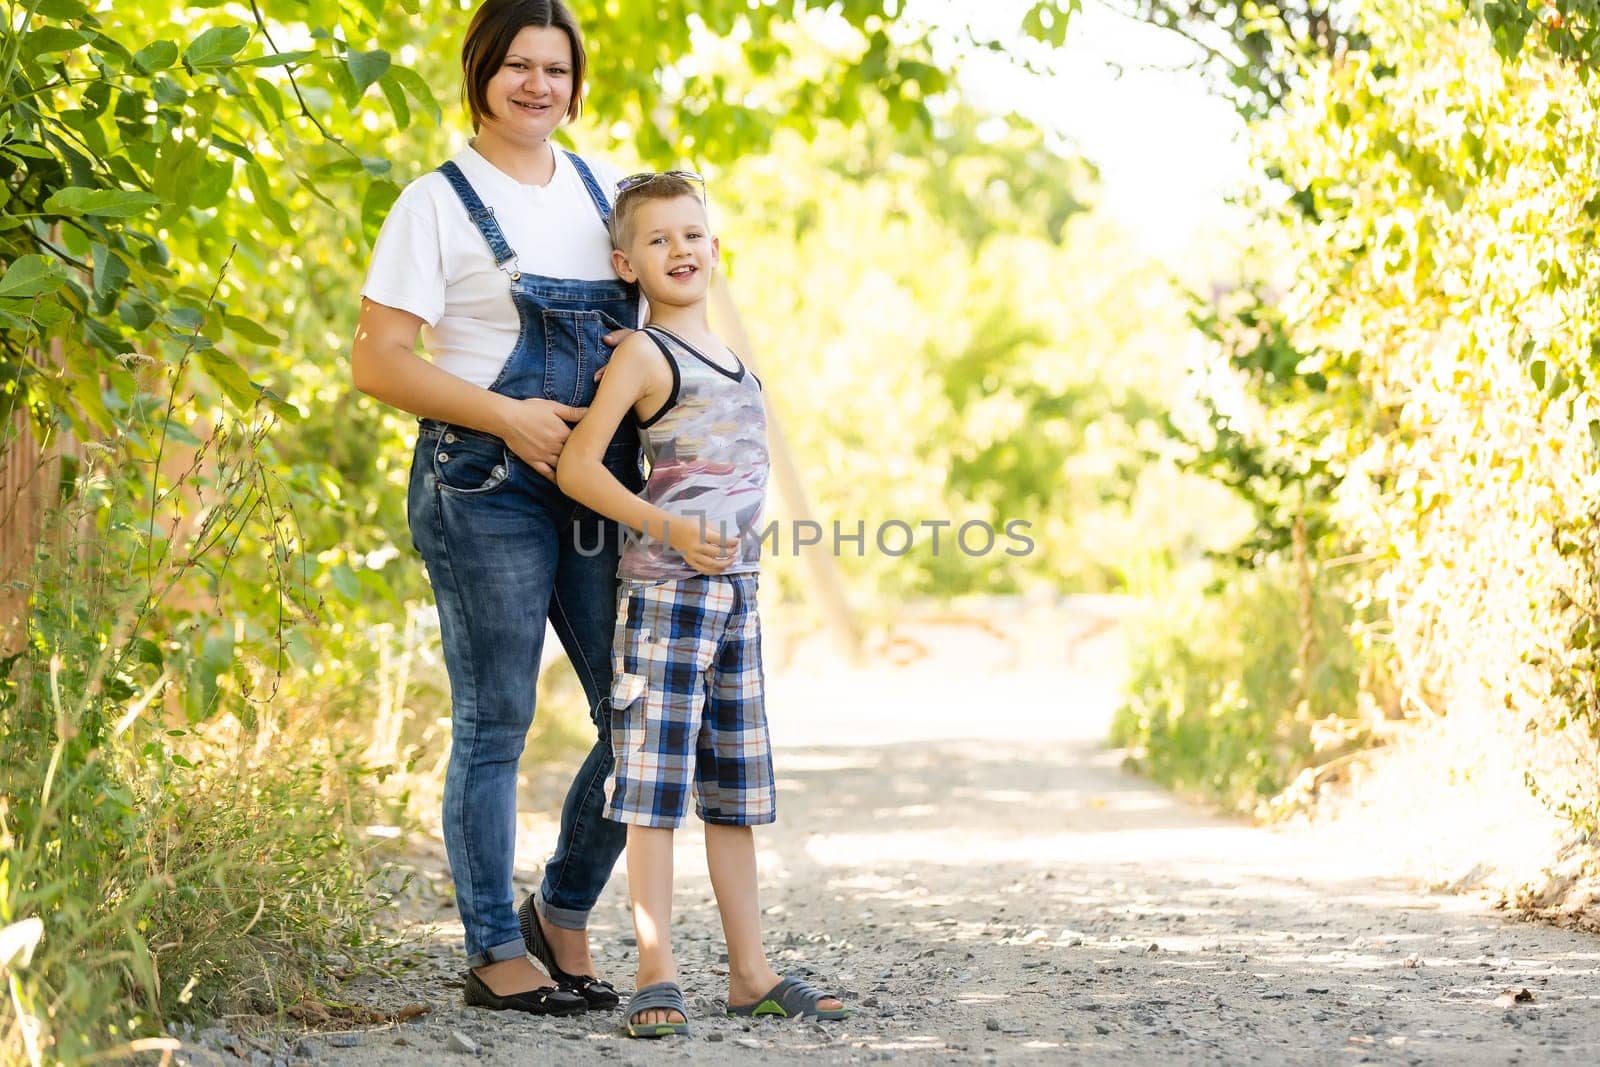 Pregnant woman walking countryside with her son. Child hugging his pregnant mother.